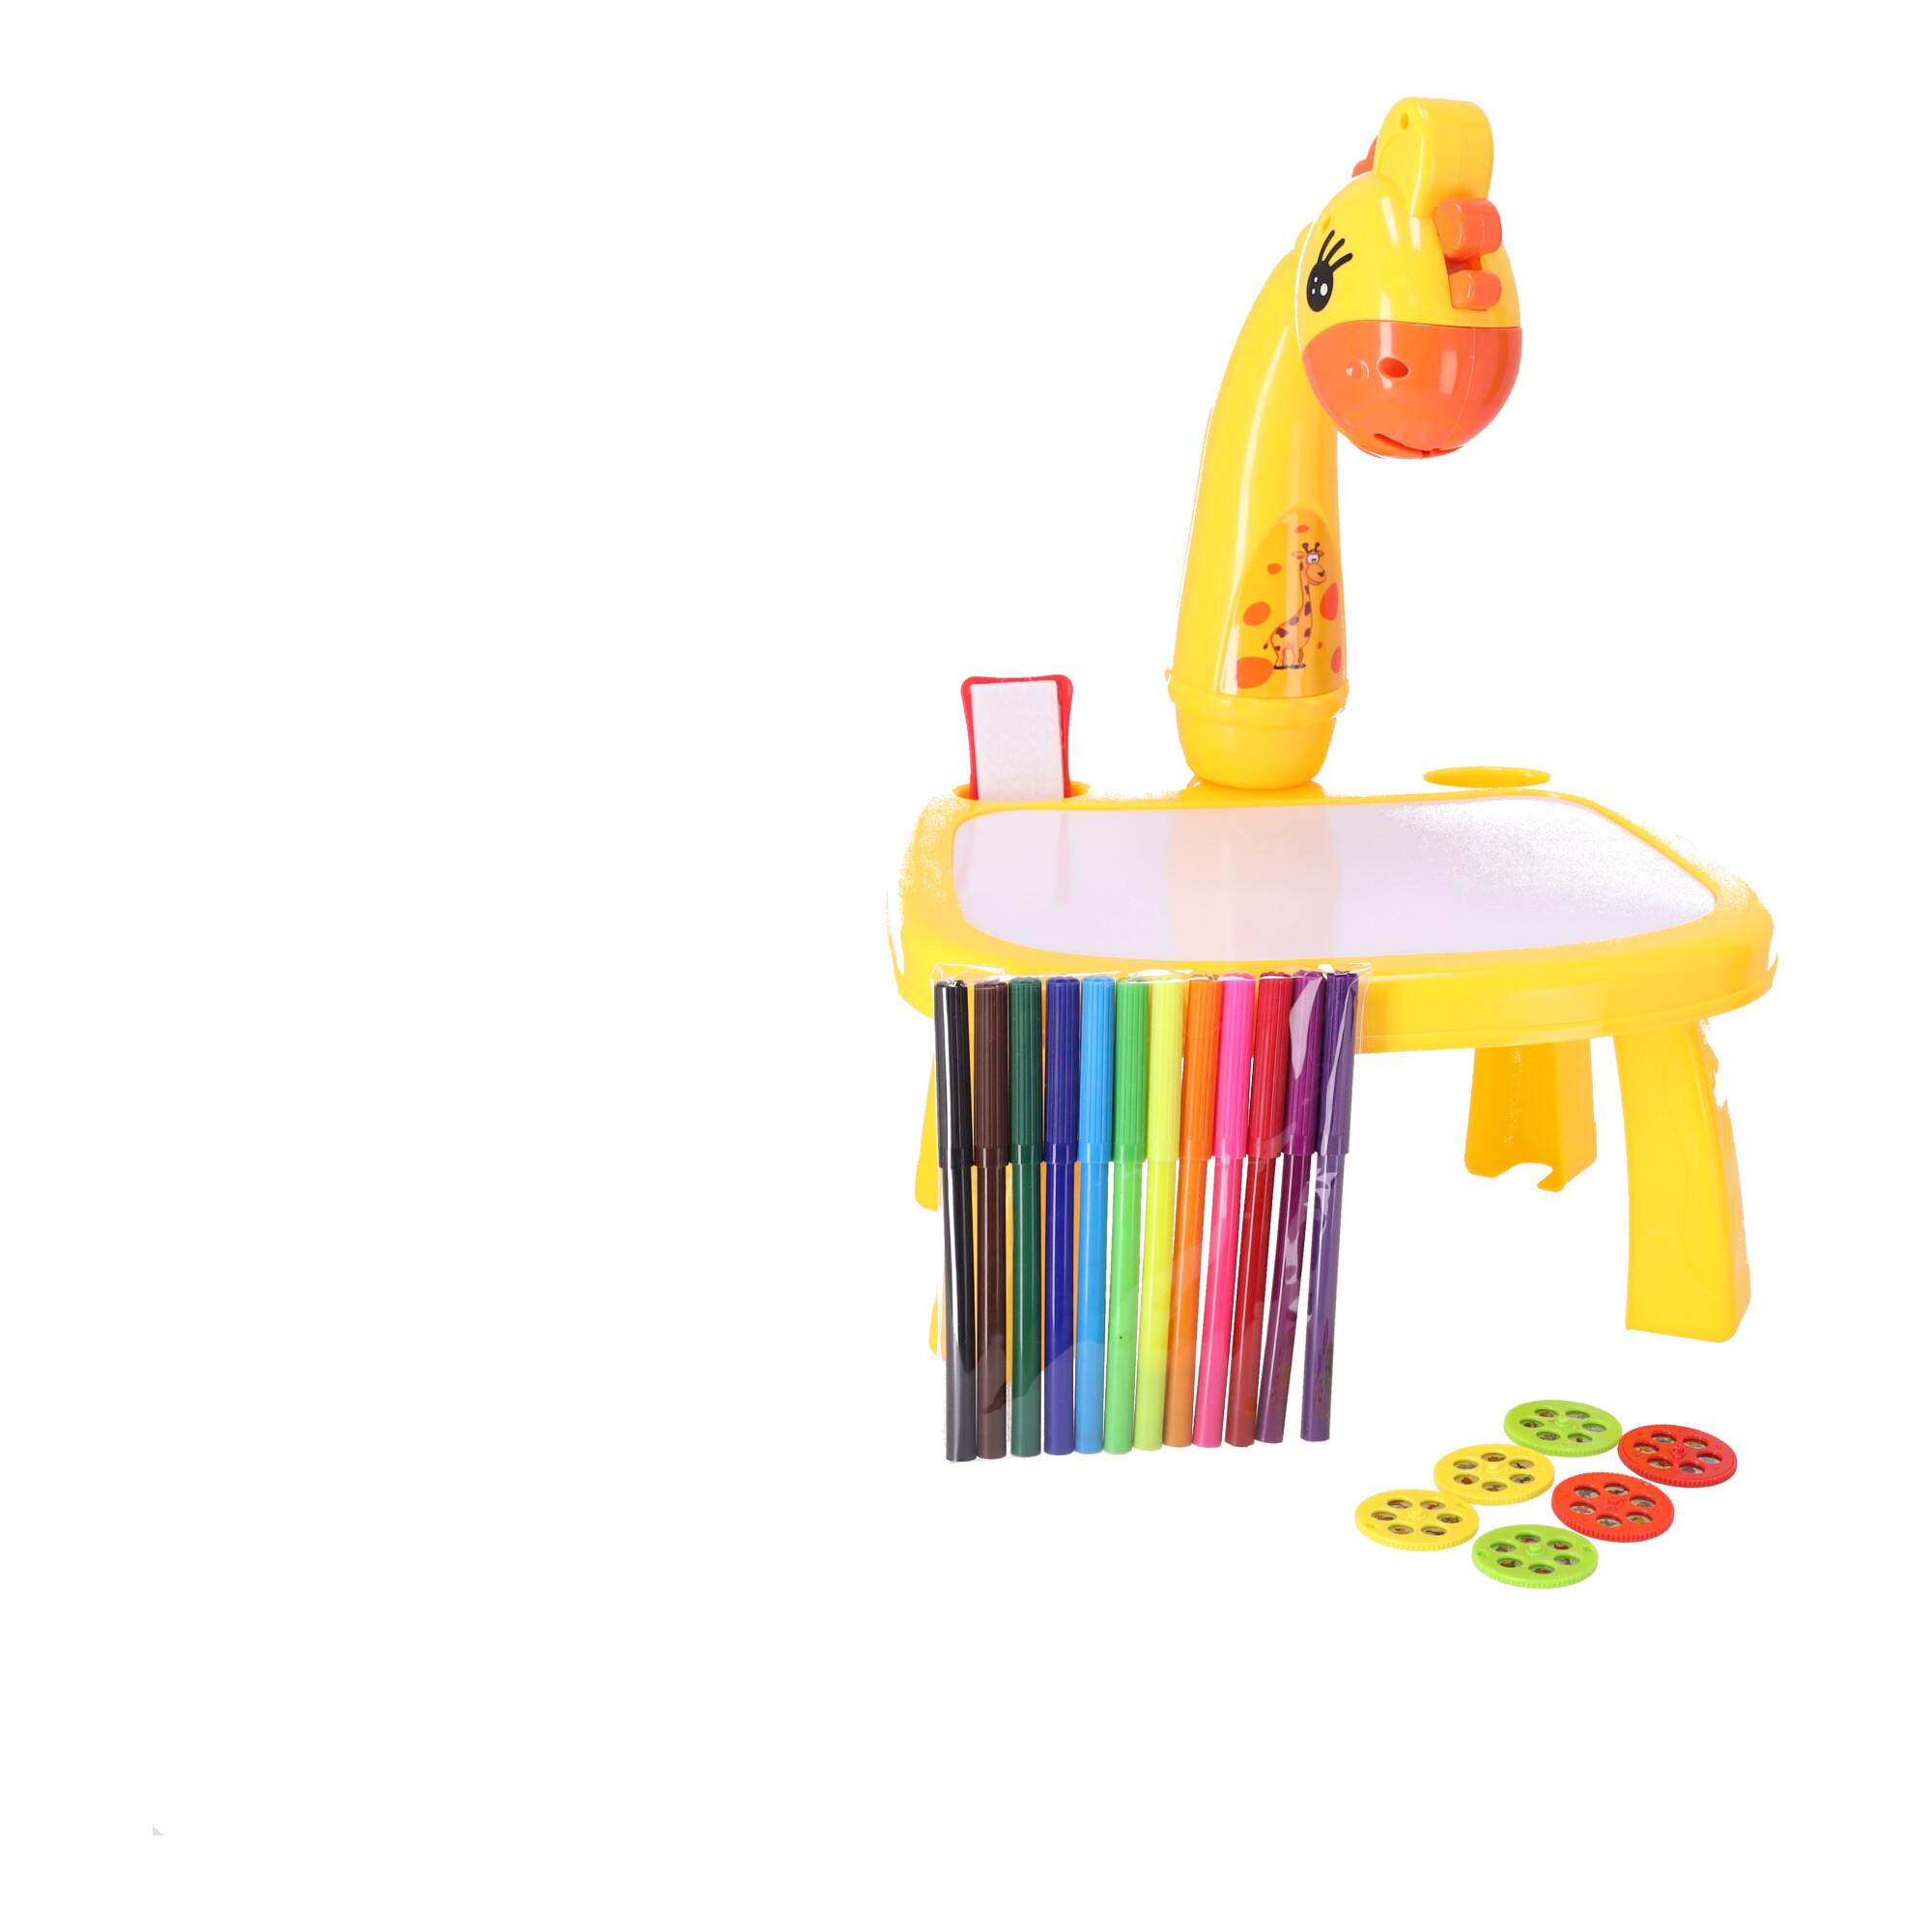 Multifunctional projector / projector for learning to draw - yellow giraffe